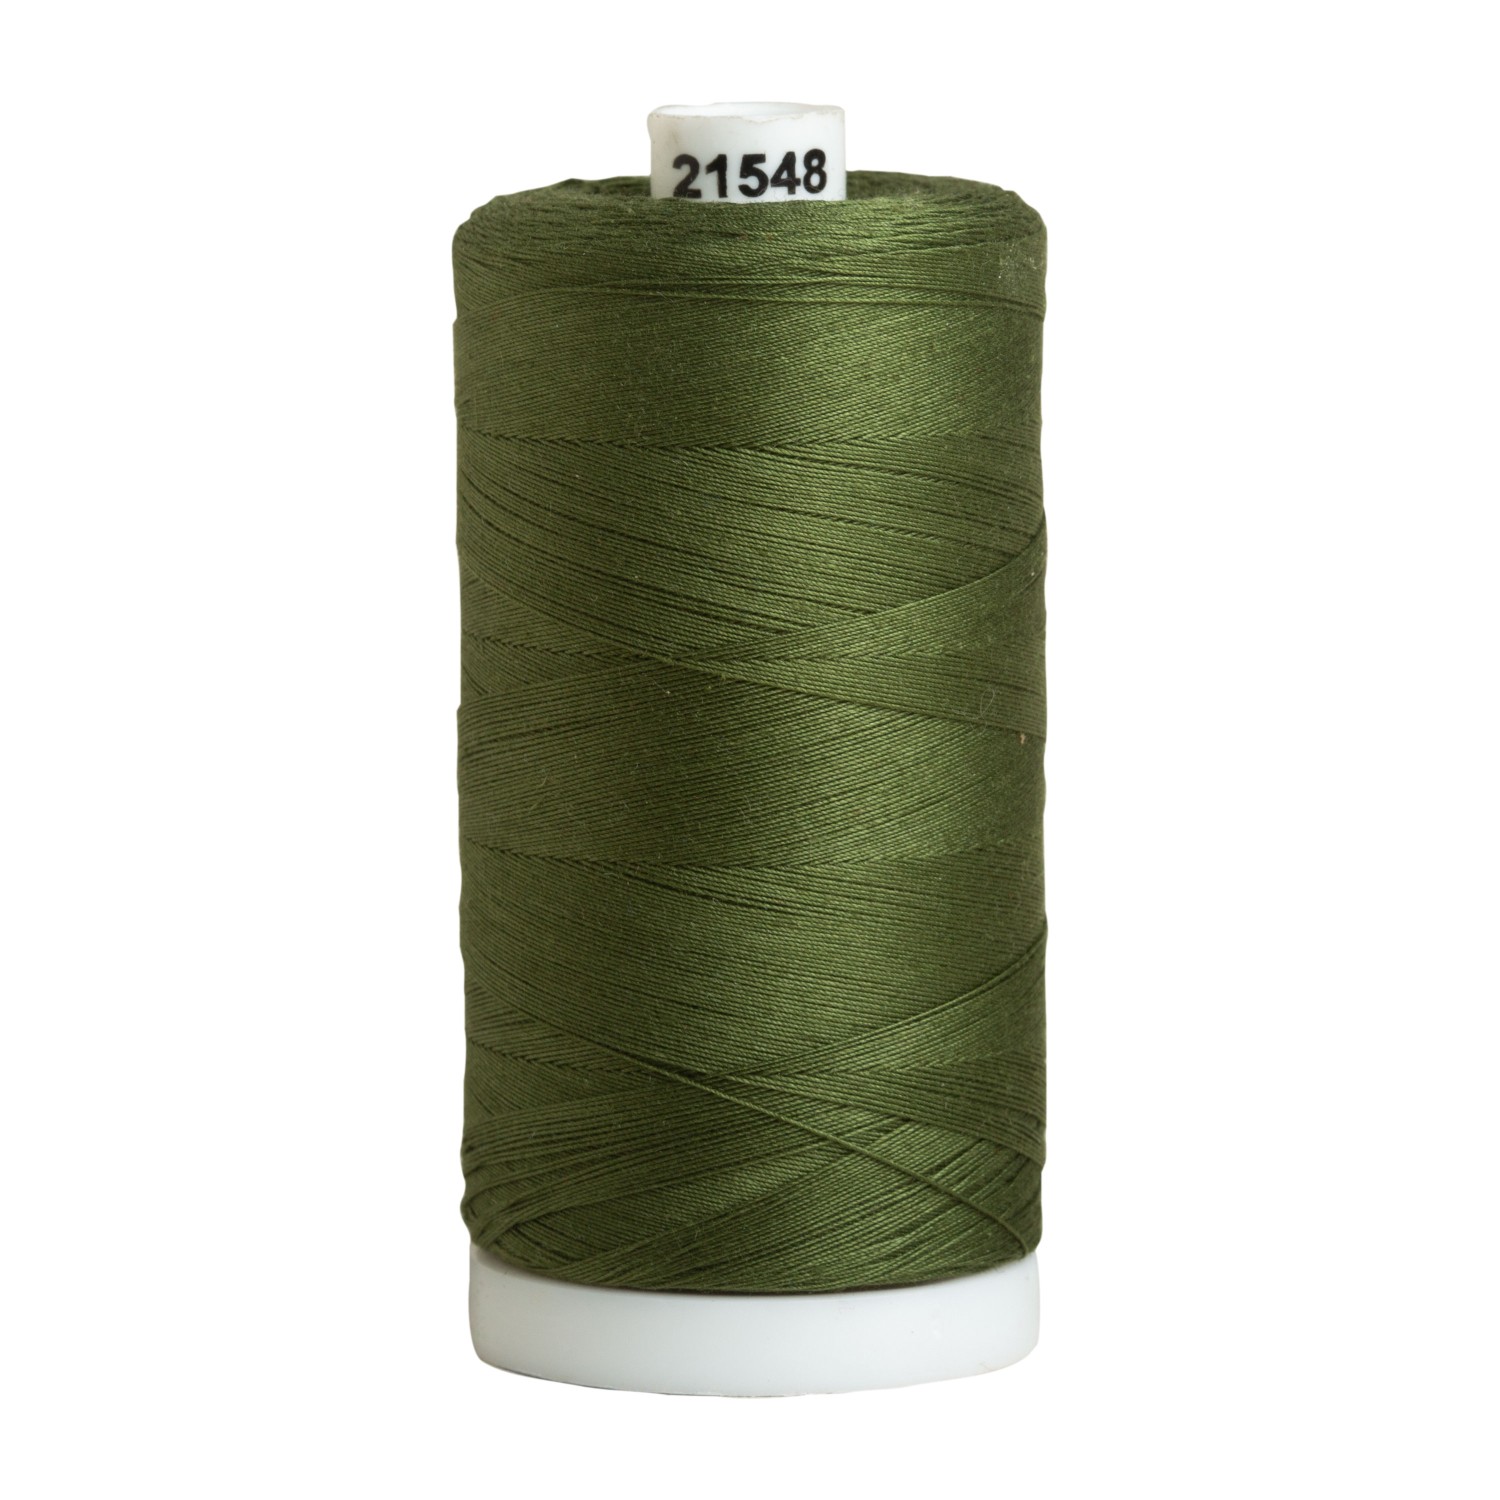  Connecting Threads 100% Cotton Thread Sets - 1200 Yard Spools  (Set of 10 - Color Wheel)